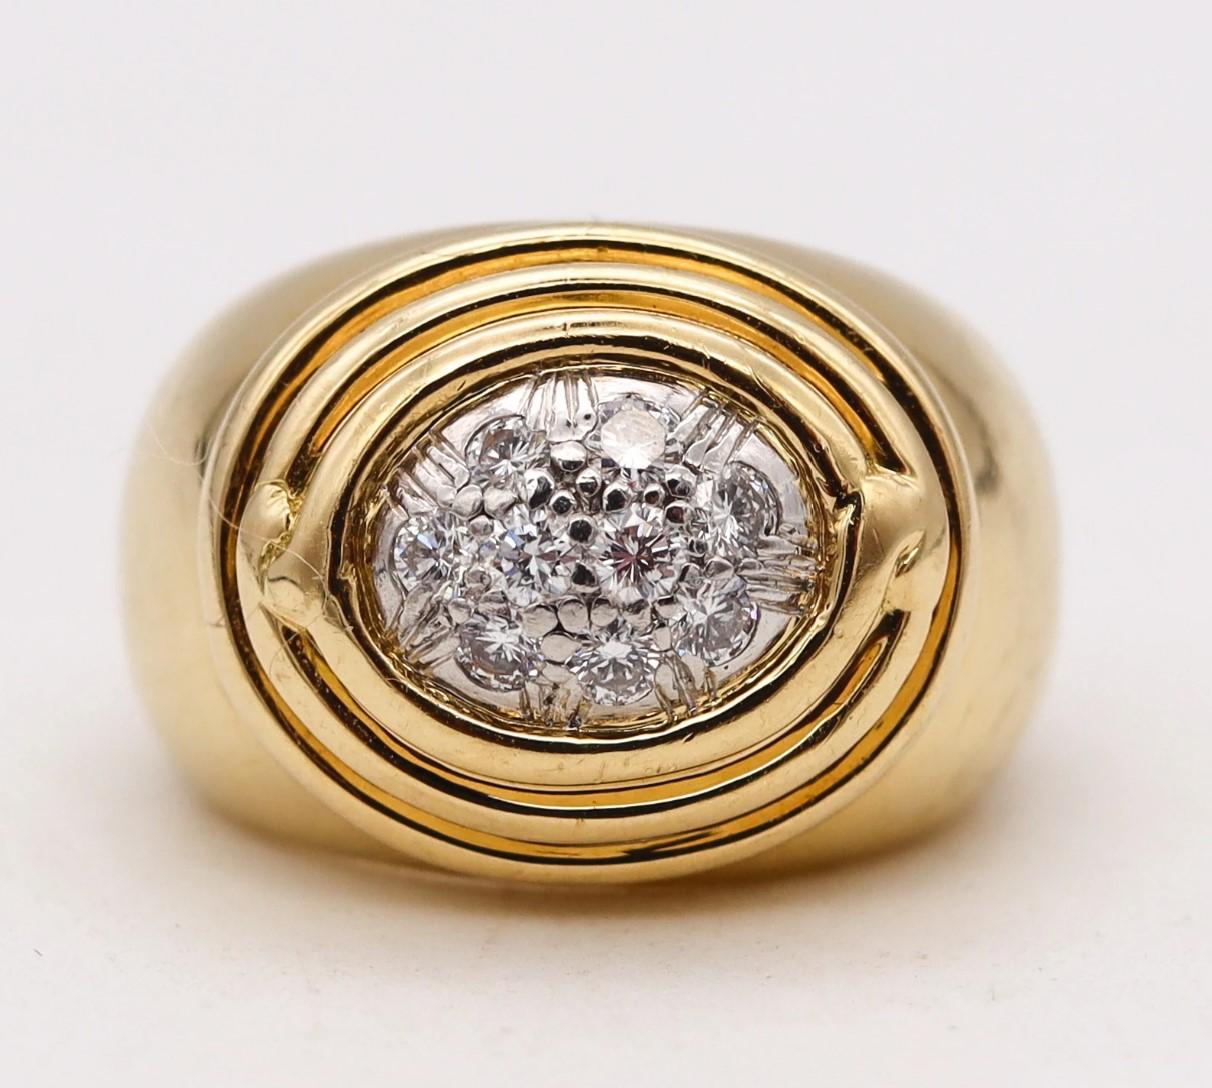 A ring designed by Jean Schlumberger for Tiffany & Co.

Elegant piece, created in New York city by Jean Schlumberger at the Tiffany Studios, back in the early 1970's. This rare and unusual ring has been crafted in solid yellow gold of 18 karats with